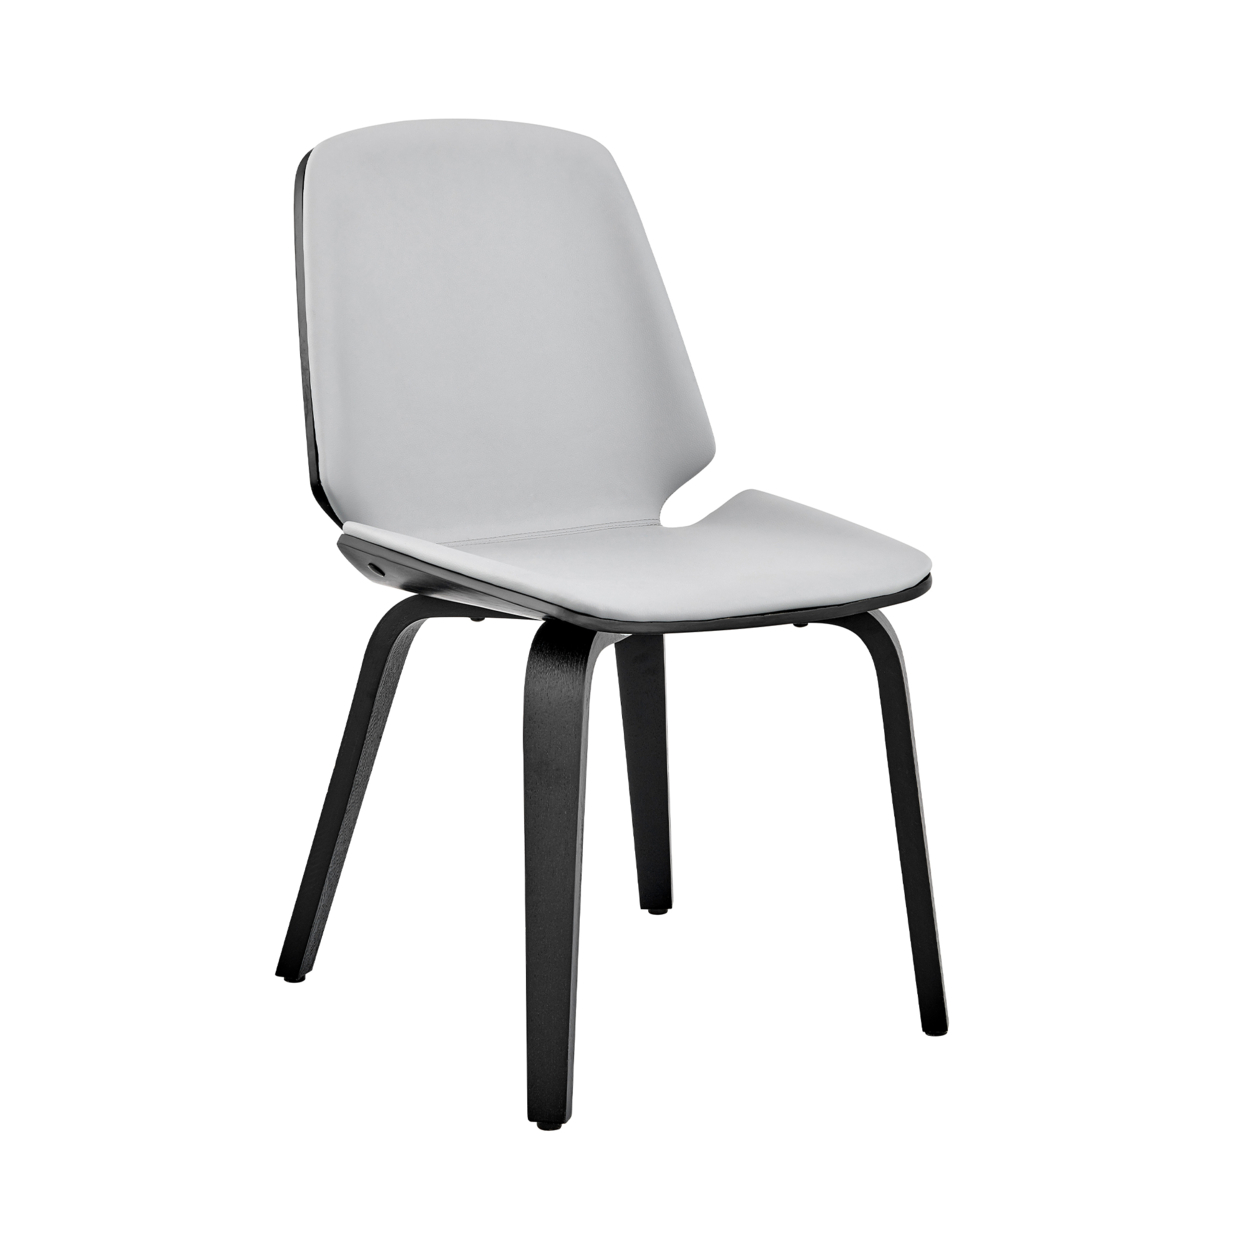 Leatherette Dining Chair With Slightly Curved Seat, Gray And Black- Saltoro Sherpi